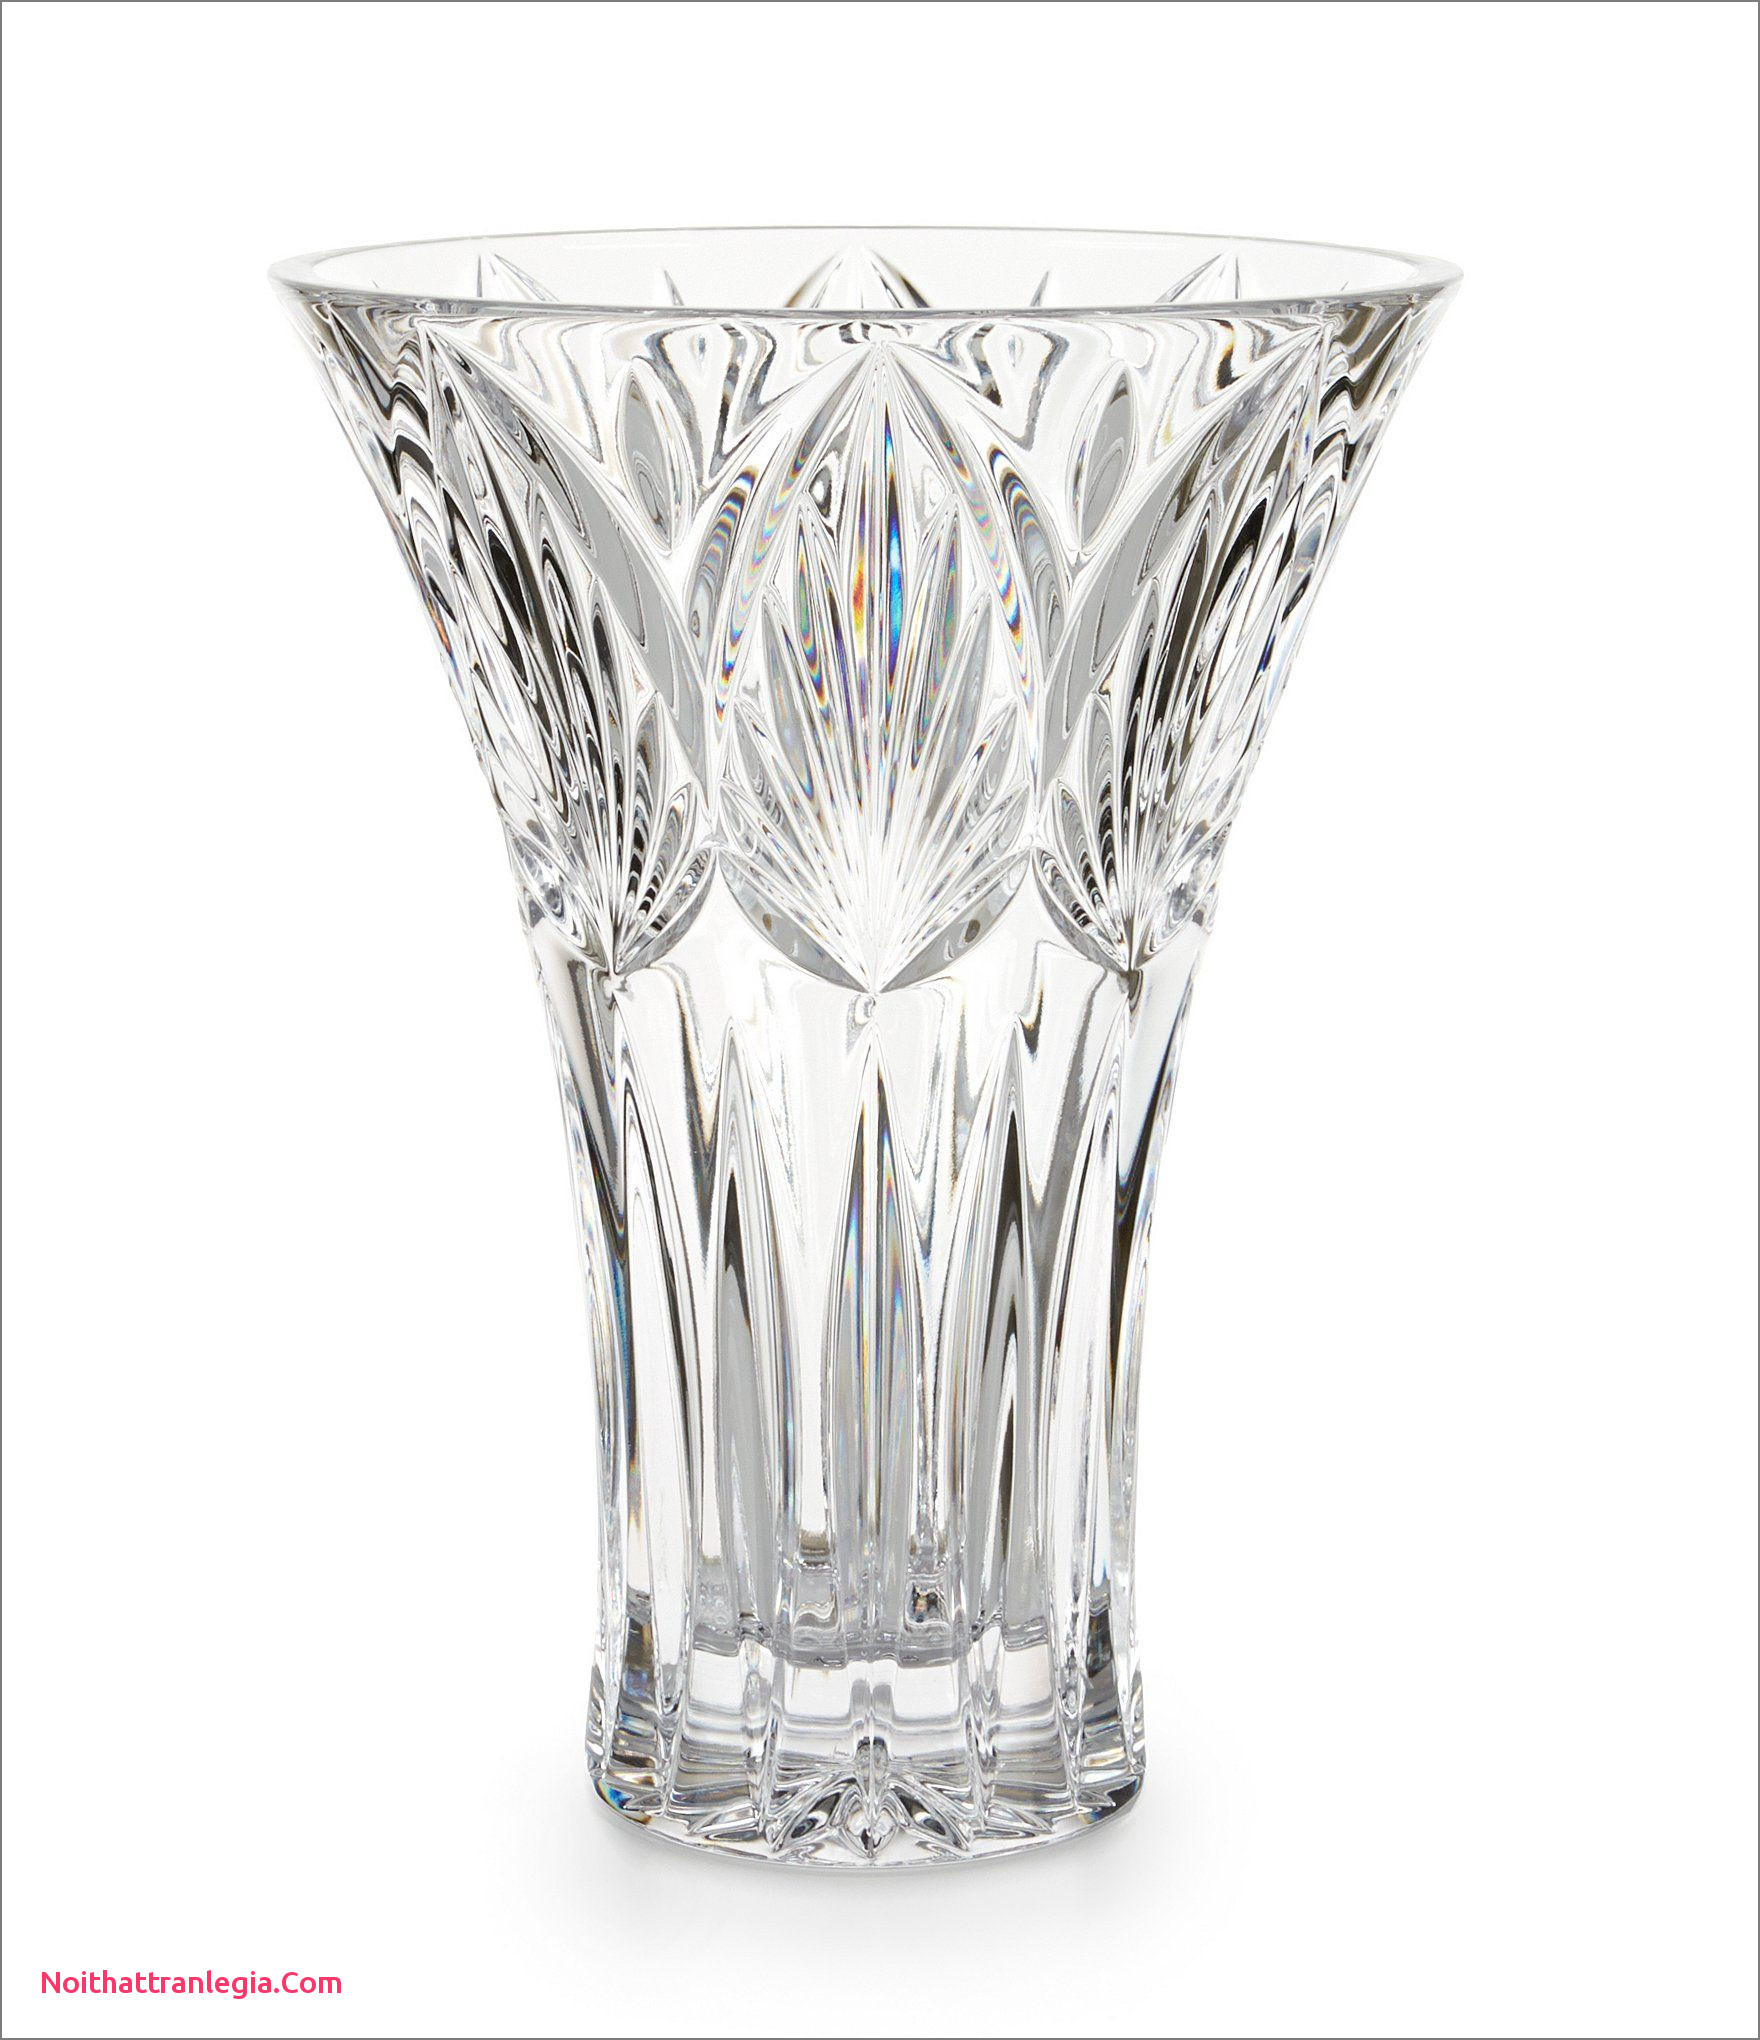 27 Recommended 8 Square Vase 2024 free download 8 square vase of 20 large waterford crystal vase noithattranlegia vases design pertaining to large waterford crystal vase best of waterford westbridge crystal vase of large waterford crystal